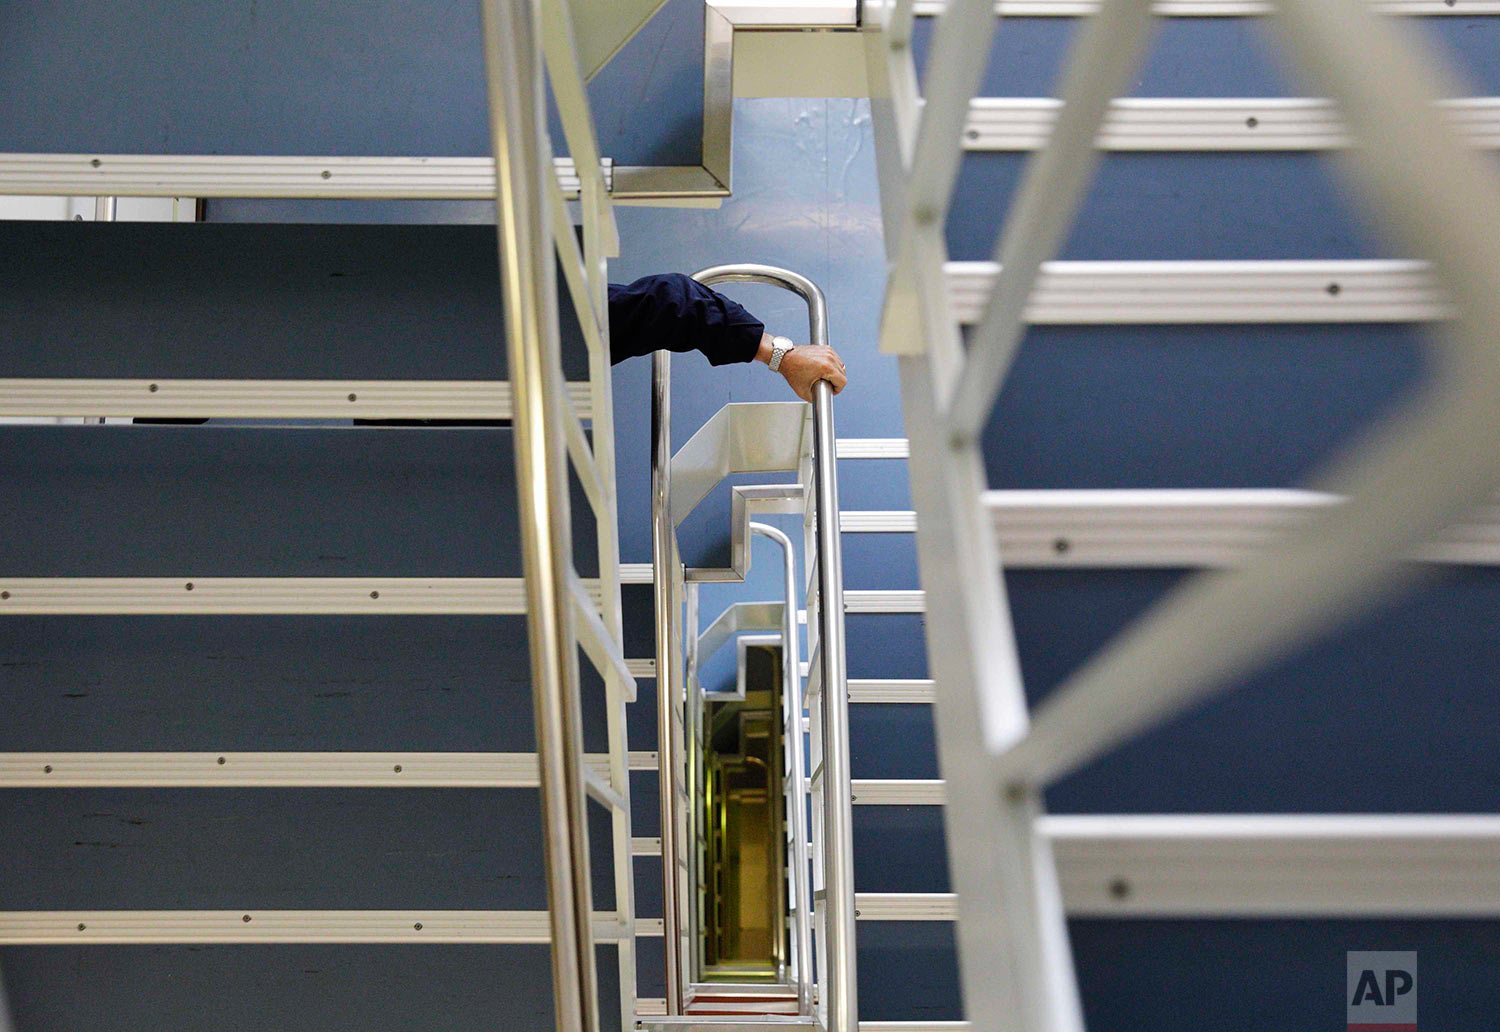  In this Wednesday, July 12, 2017 photo, Nigel Greenwood, assistant ice navigator and retired Royal Canadian Navy rear admiral, climbs down the six flights of stairs from the bridge to the mess hall as he heads down for dinner aboard the Finnish iceb